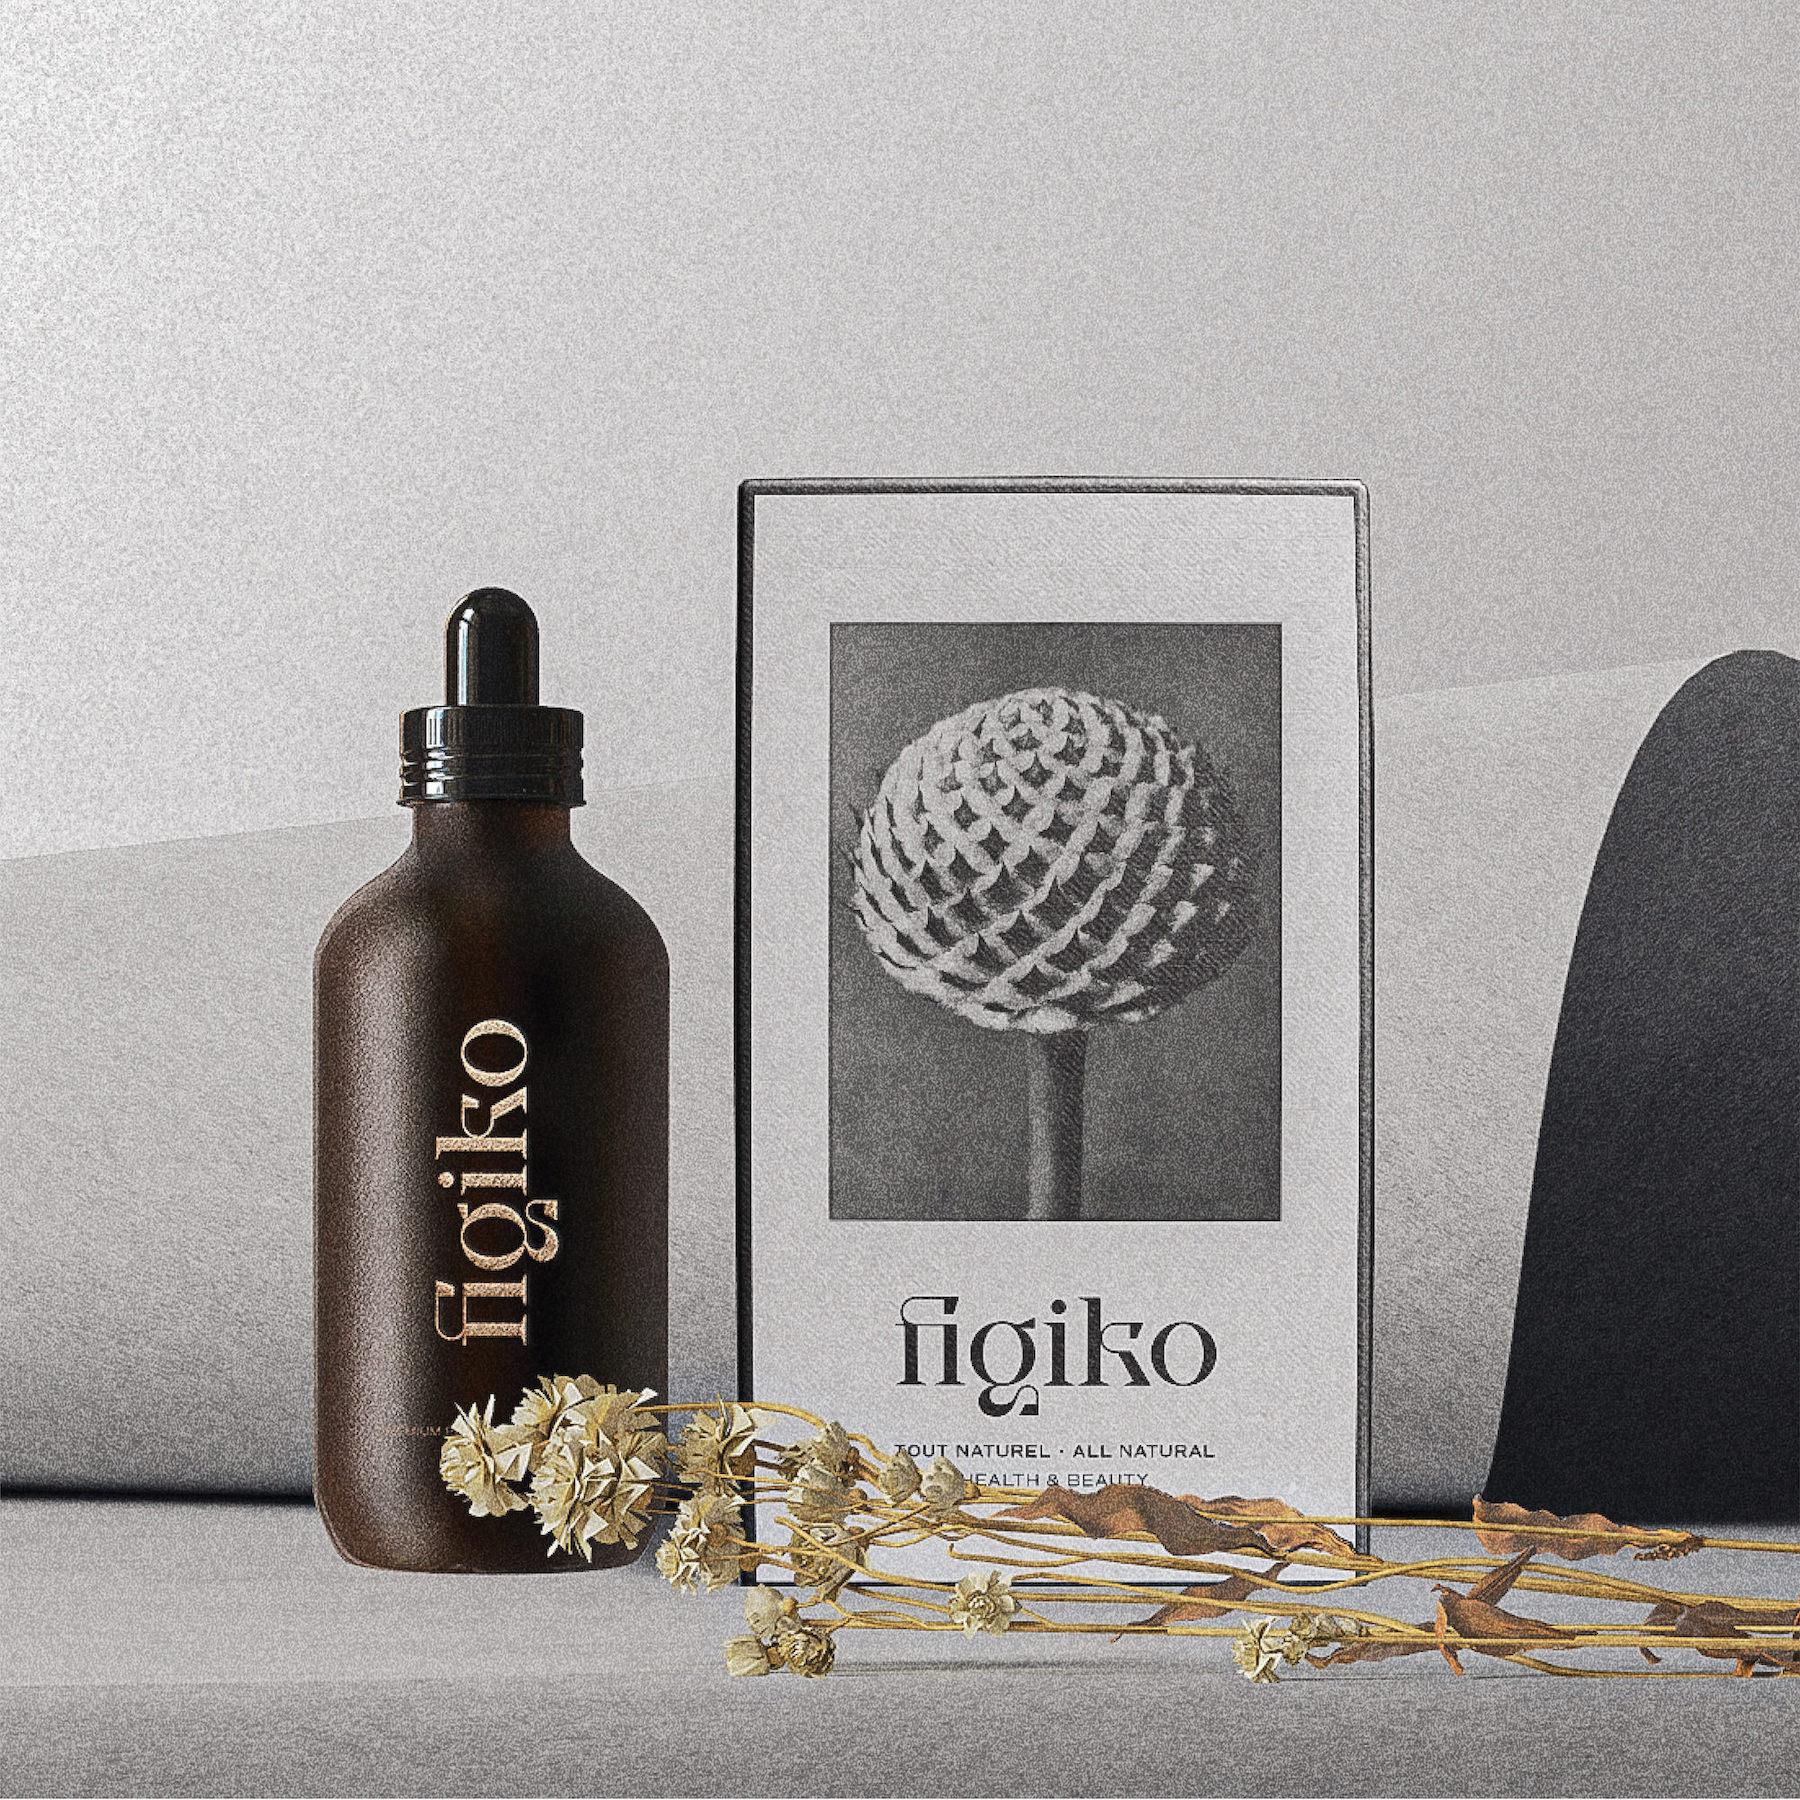 Rebeccca Berrington Creates Brand Identity and Packaging Design for the Natural Beauty Brand Figiko